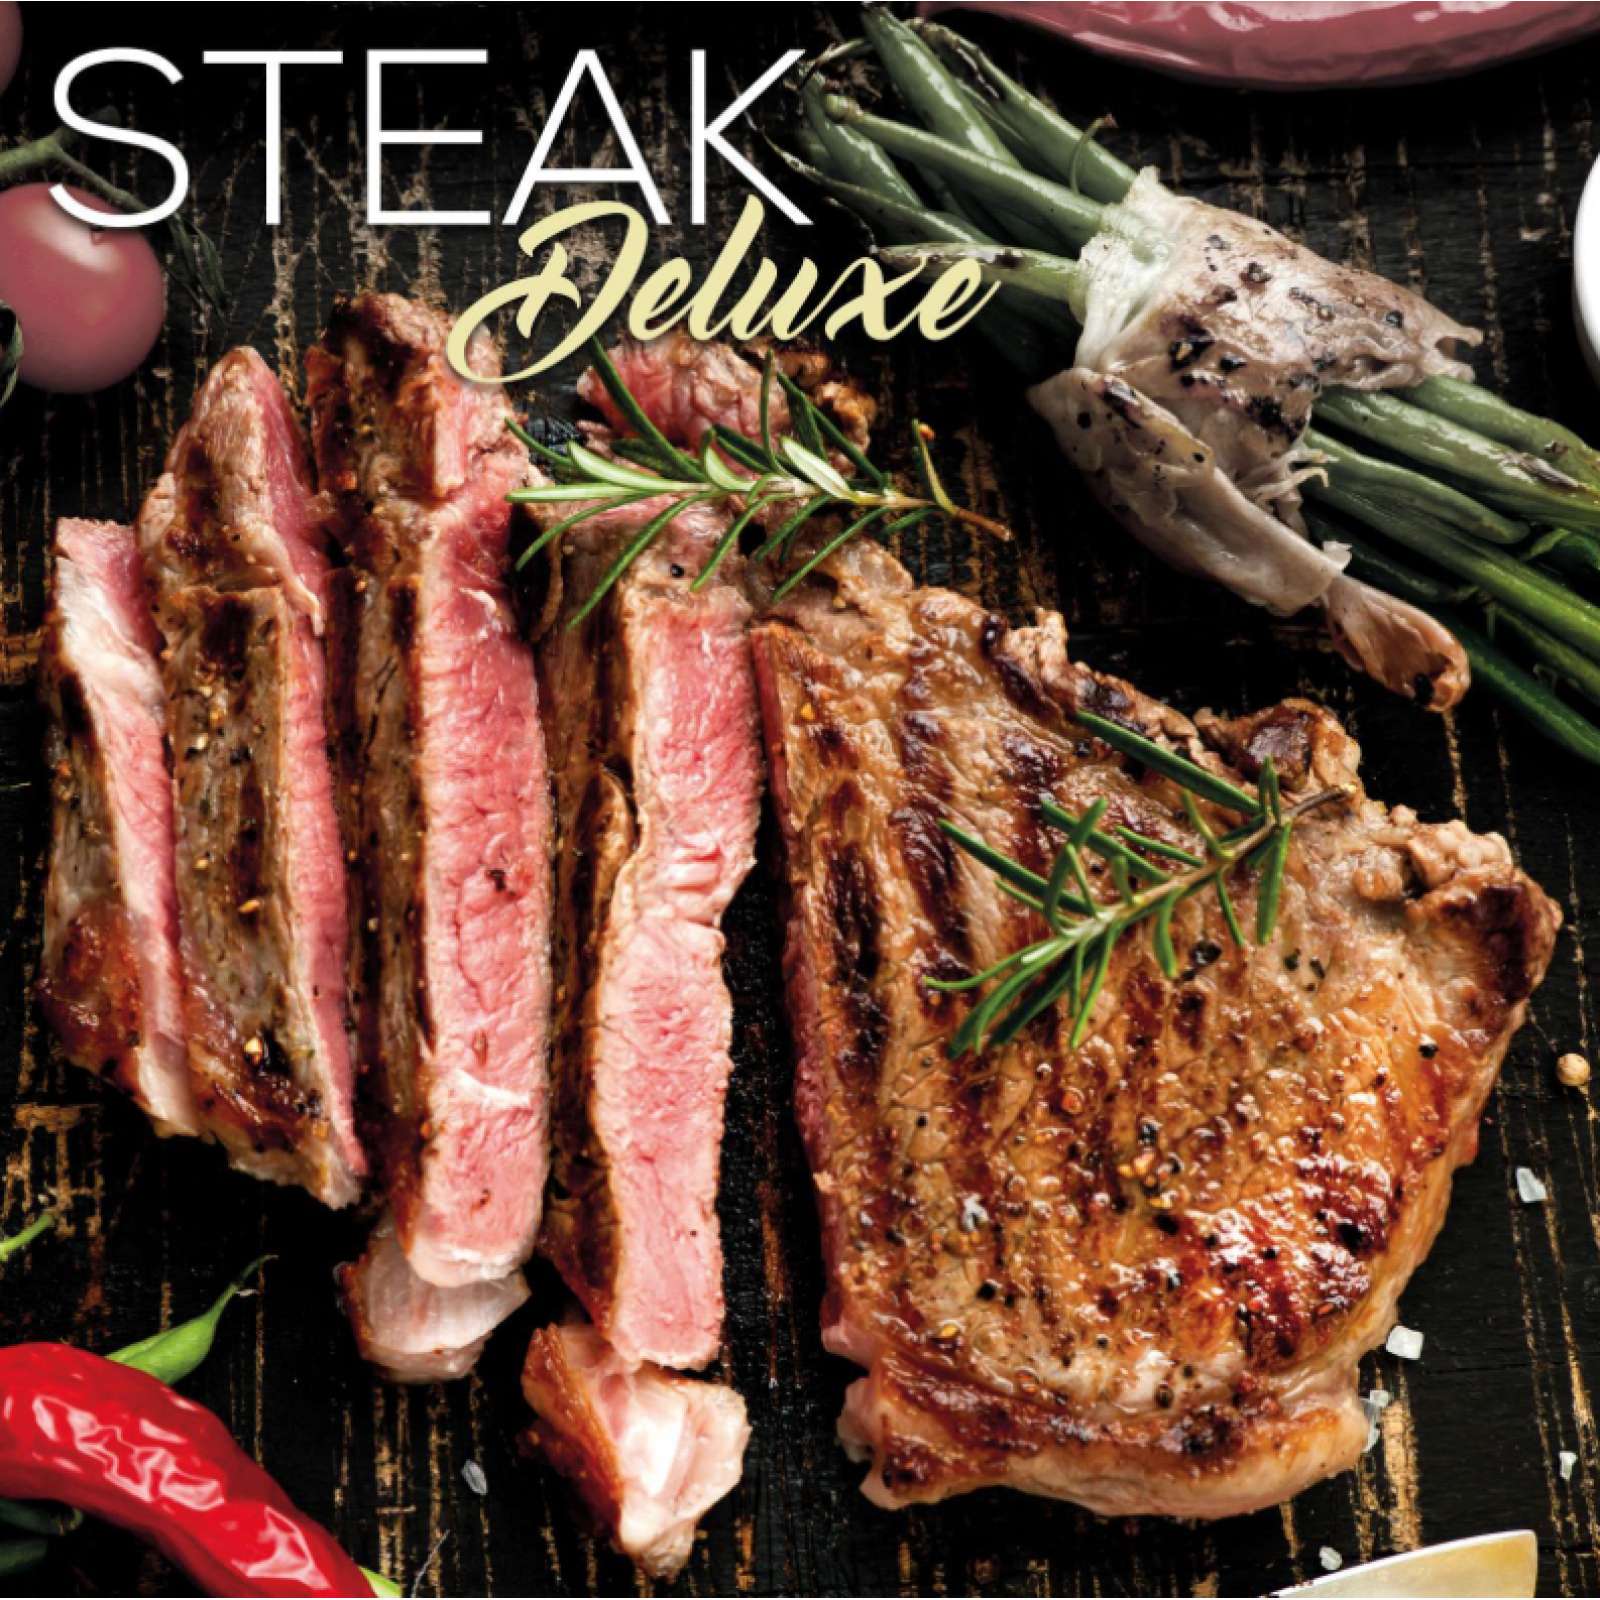 16.05.2024 Grillkurs STEAK Deluxe - Tomahawk, Prime Rib, Dry Aged - Donnerstag - 4 bis 5 Std.